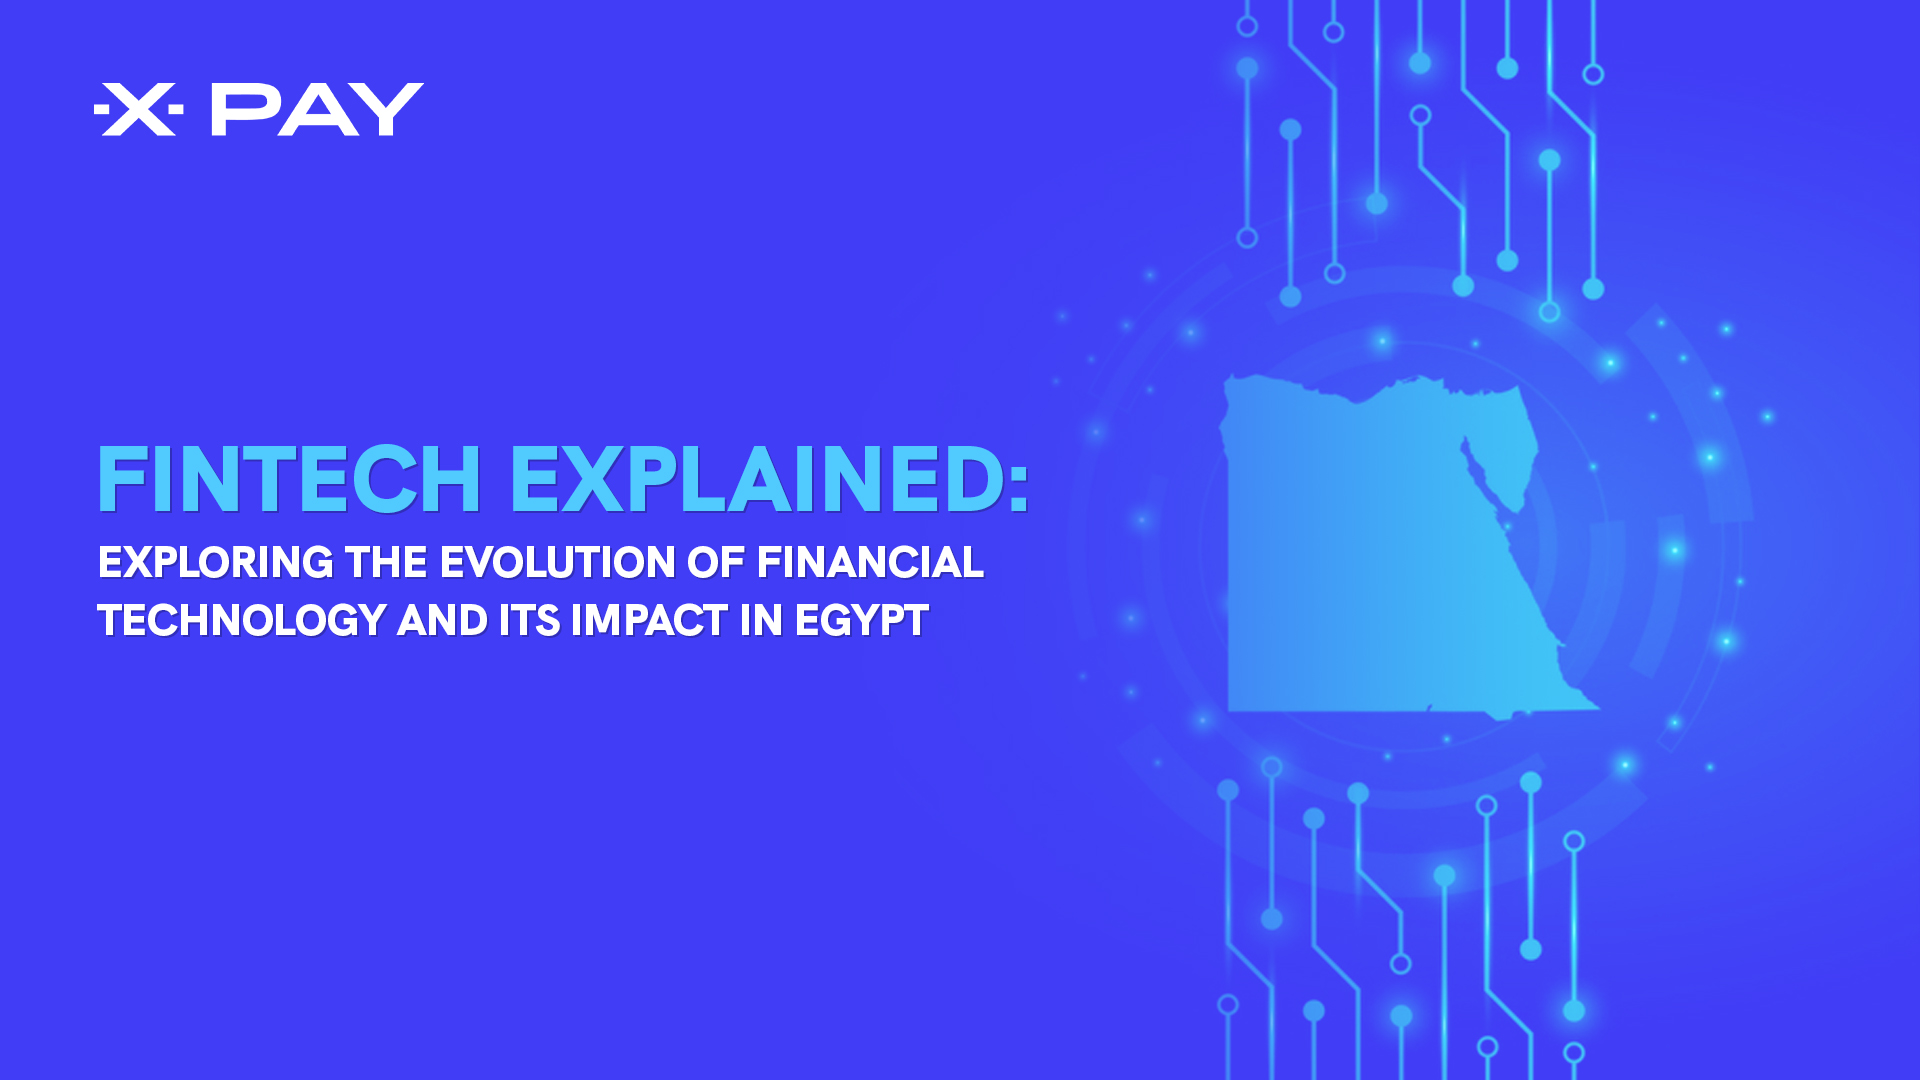 FinTech Explained: Exploring the Evolution of Financial Technology and Its Impact in Egypt